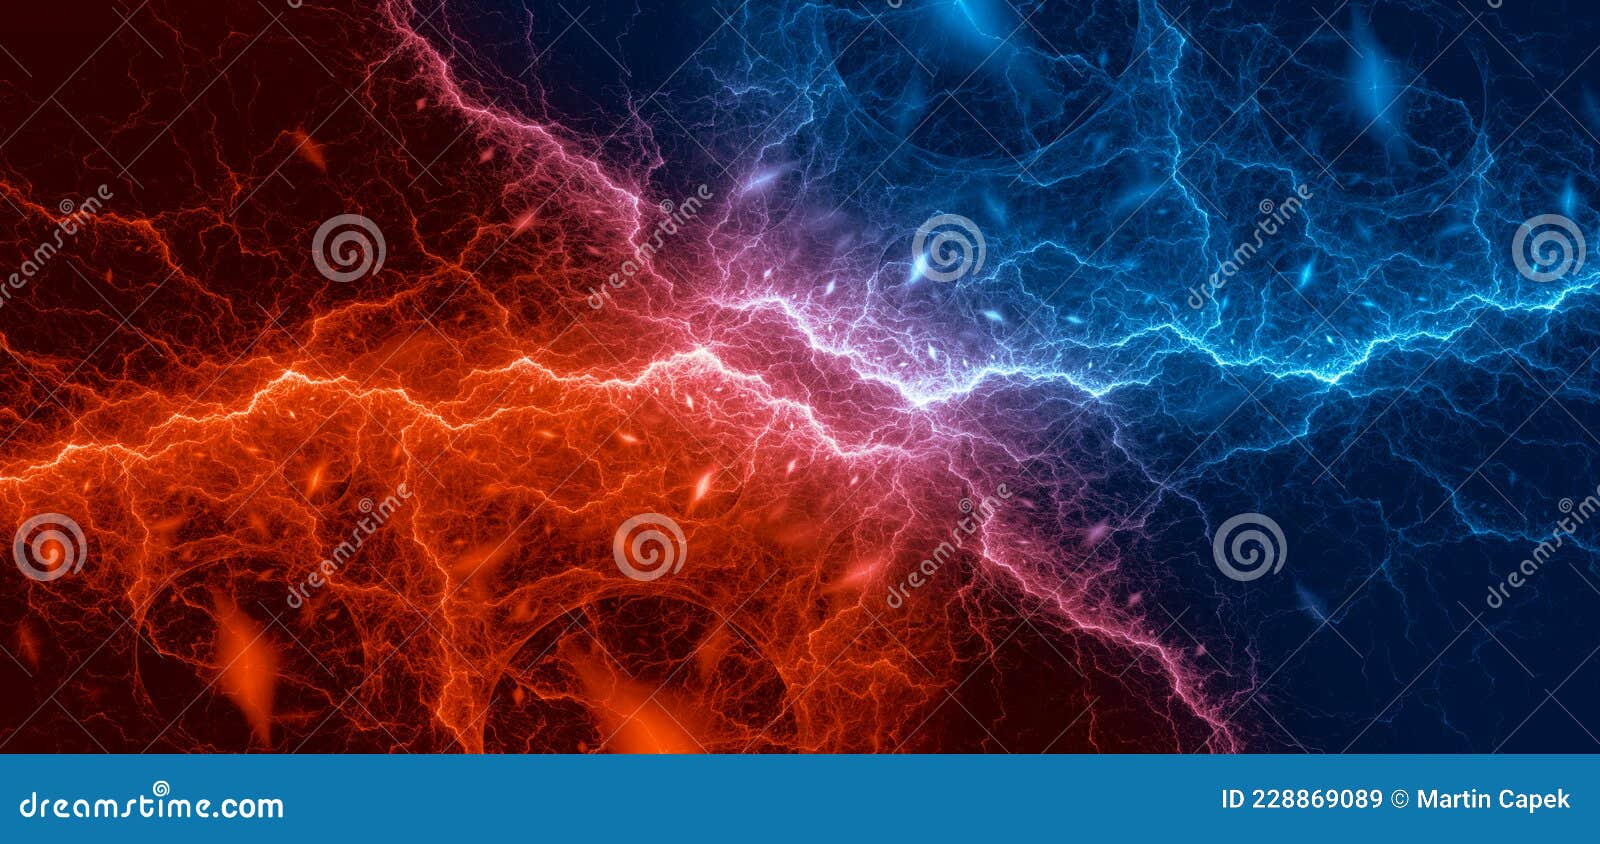 Blue and Red Lightning, Abstract Plasma Background Fire and Ice ...